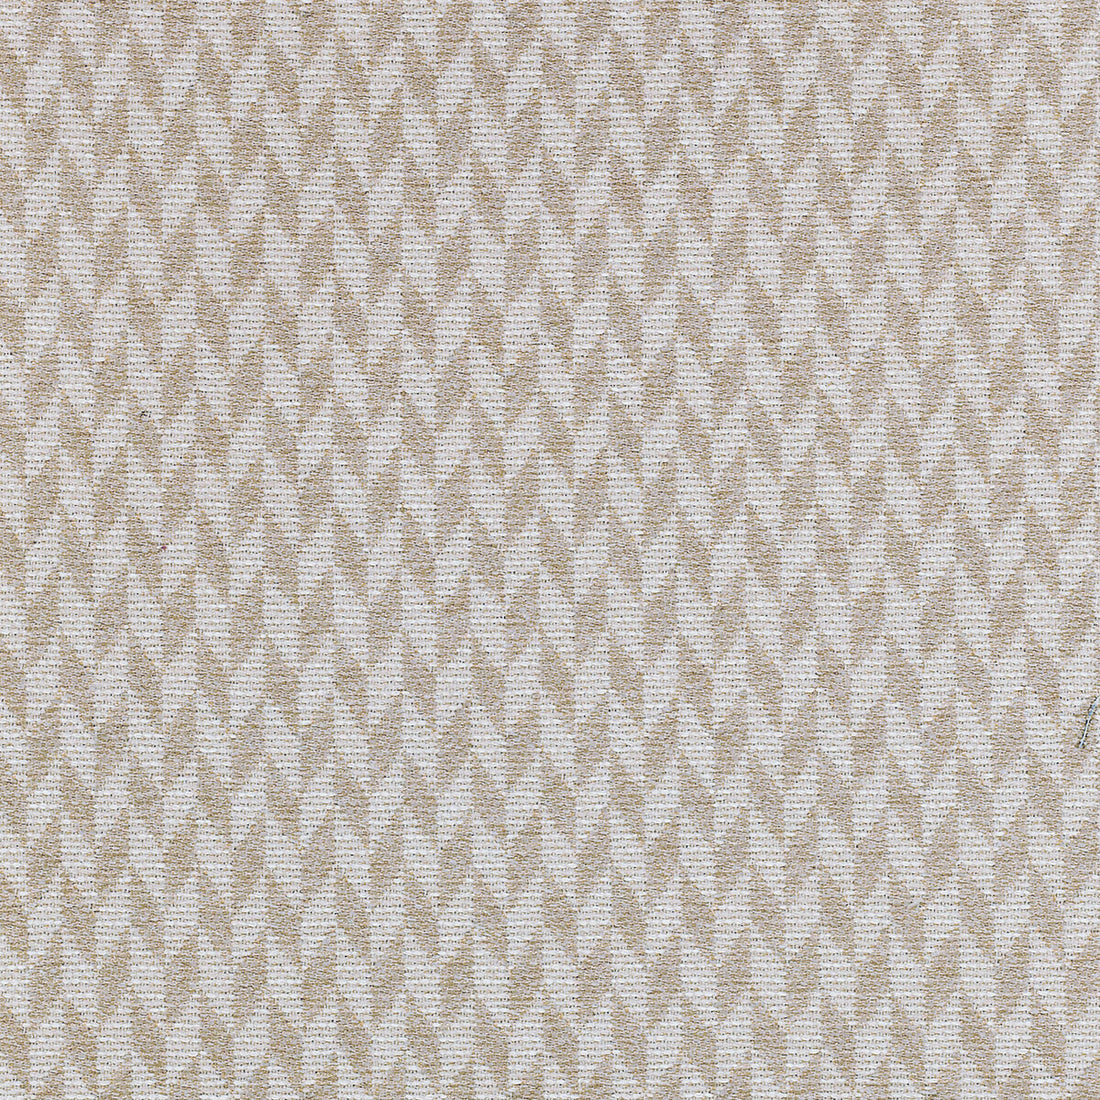 Tupai Outdoor fabric in 211 color - pattern 36200.106.0 - by Kravet Couture in the Missoni Home collection